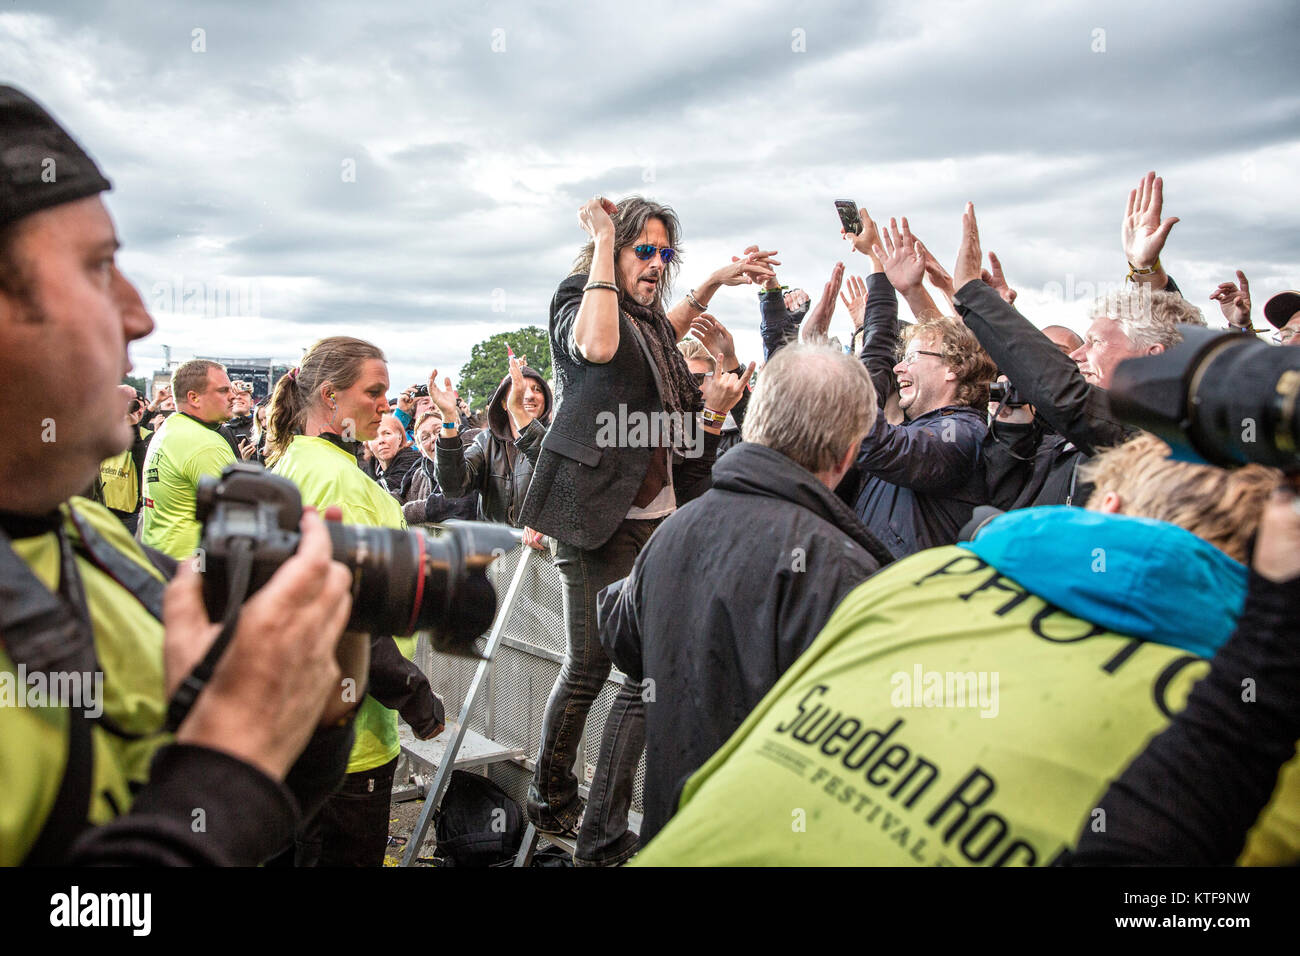 The British-American hard rock band Foreigner performs a live concert at the Sweden Rock Festival 2016. Here vocalist Kelly Hansen is seen live with the crowds. Sweden, 10/06 2016. Stock Photo